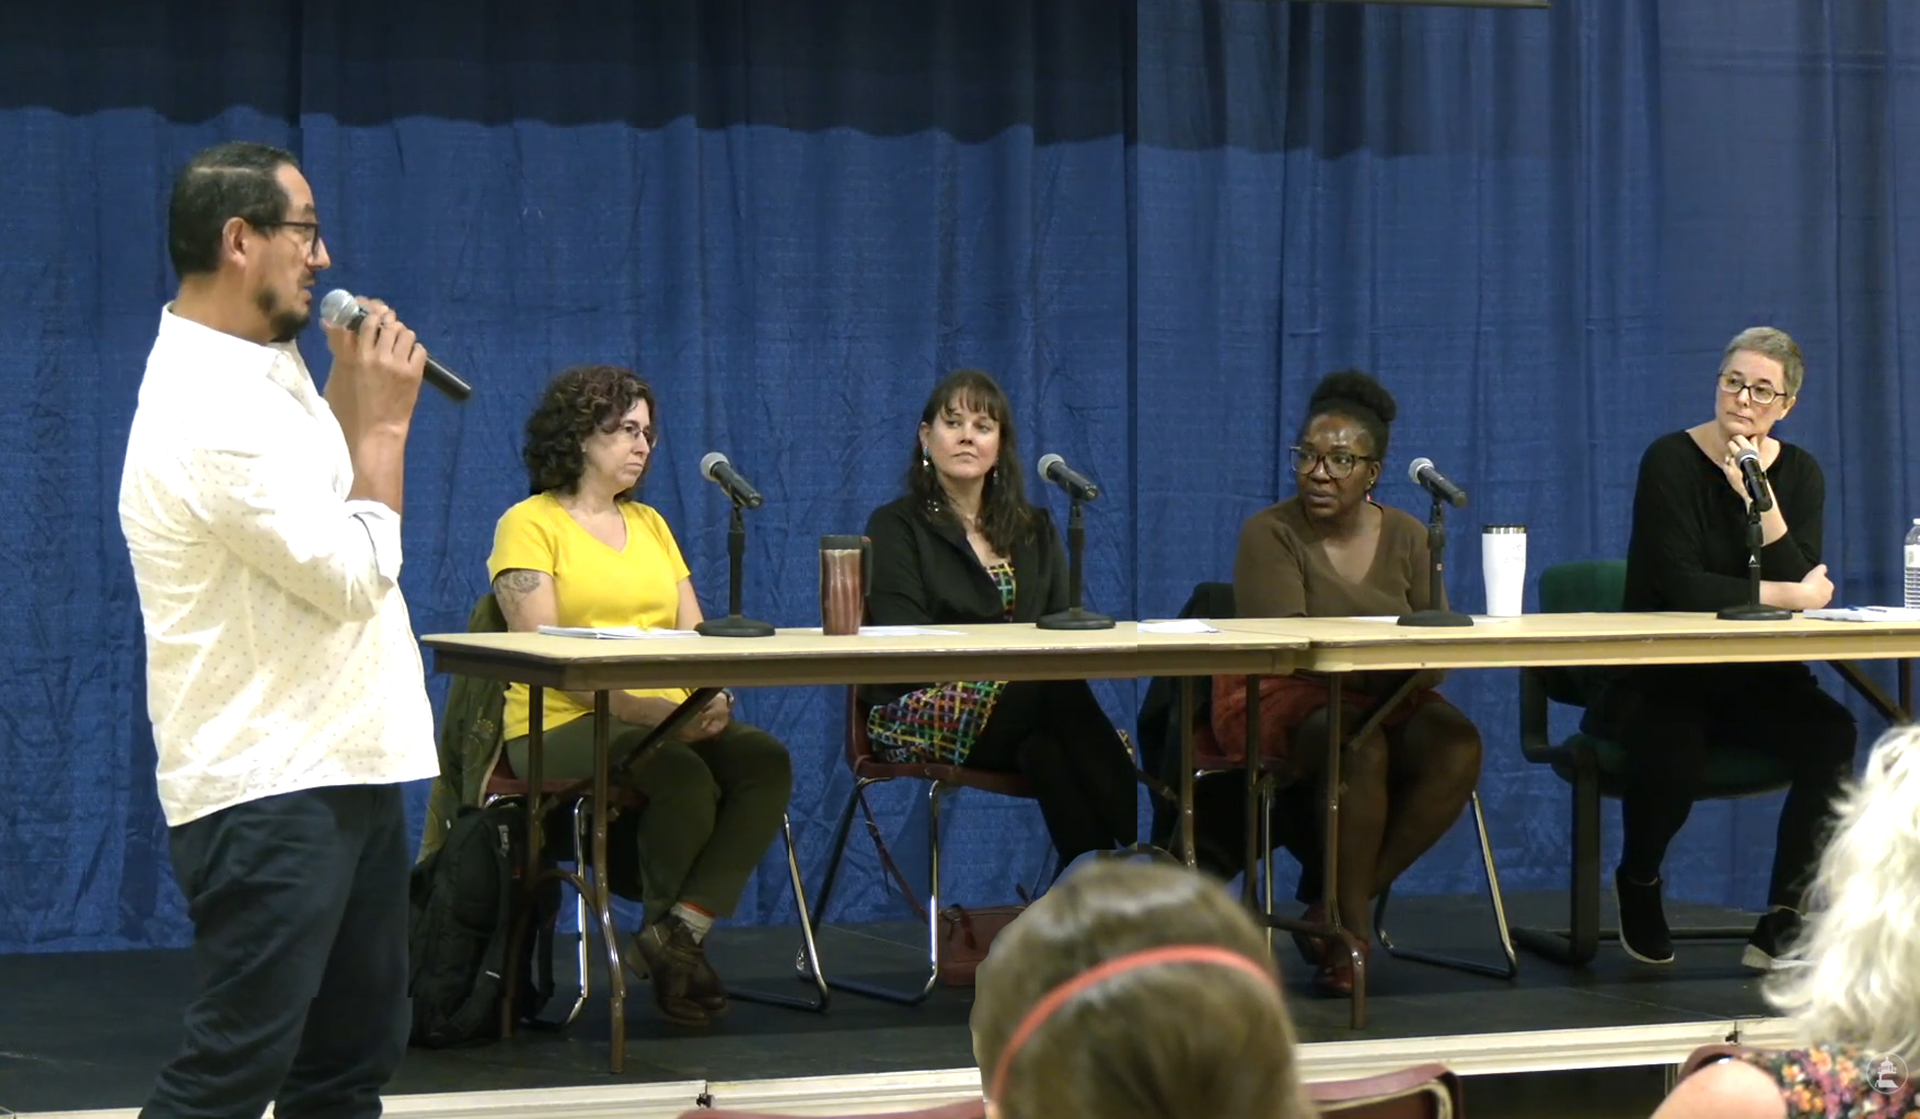 video still of four panelists at table with male questioner in foreground.